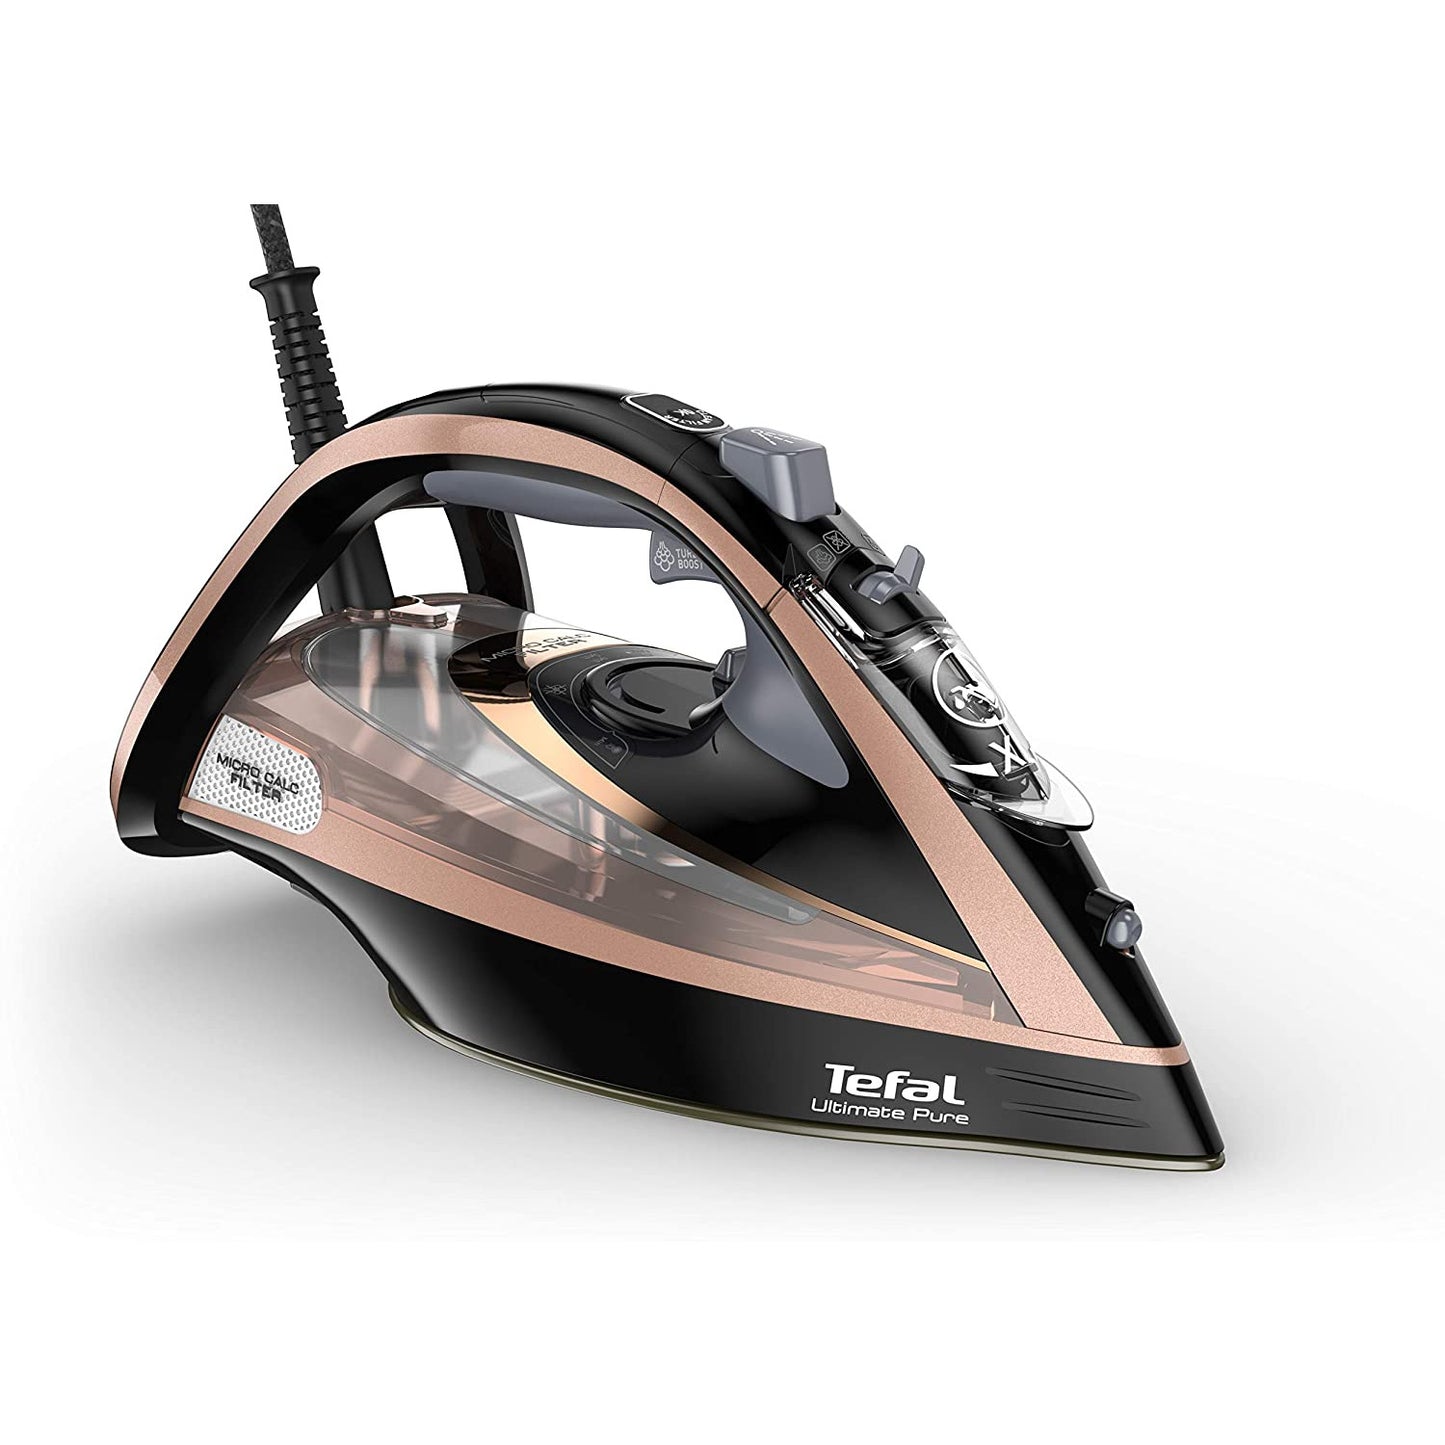 Tefal FV9845 Ultimate Pure Steam Iron, Black/Gold